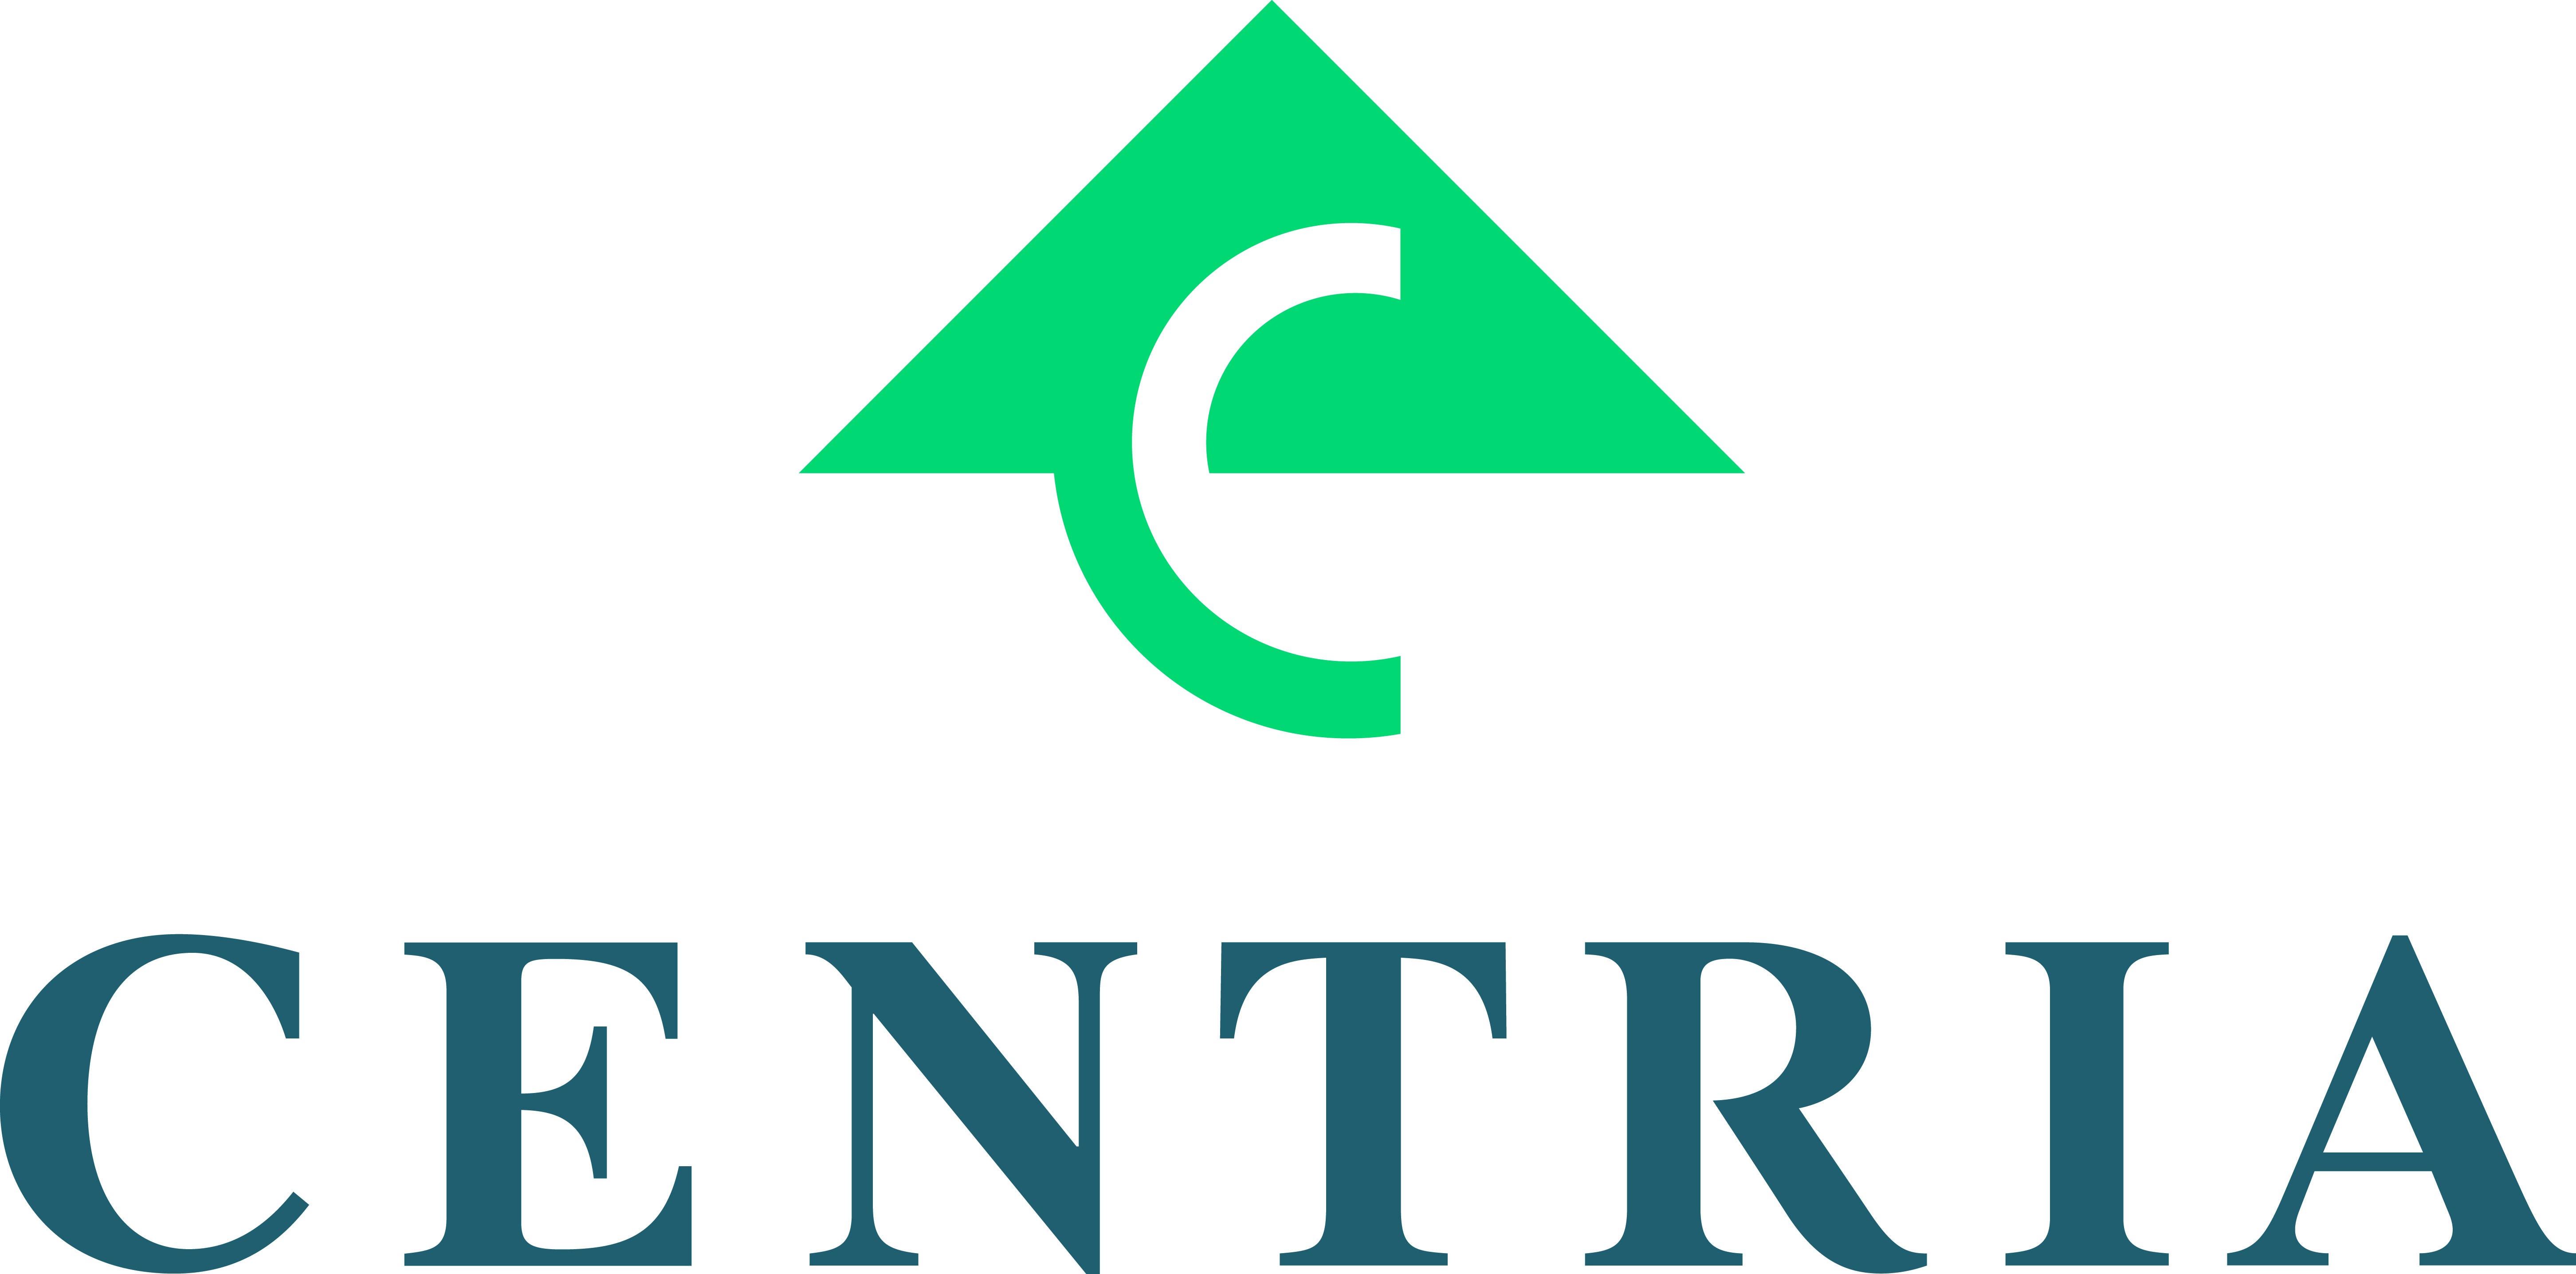 Long-tenured Centria employee receives promotion